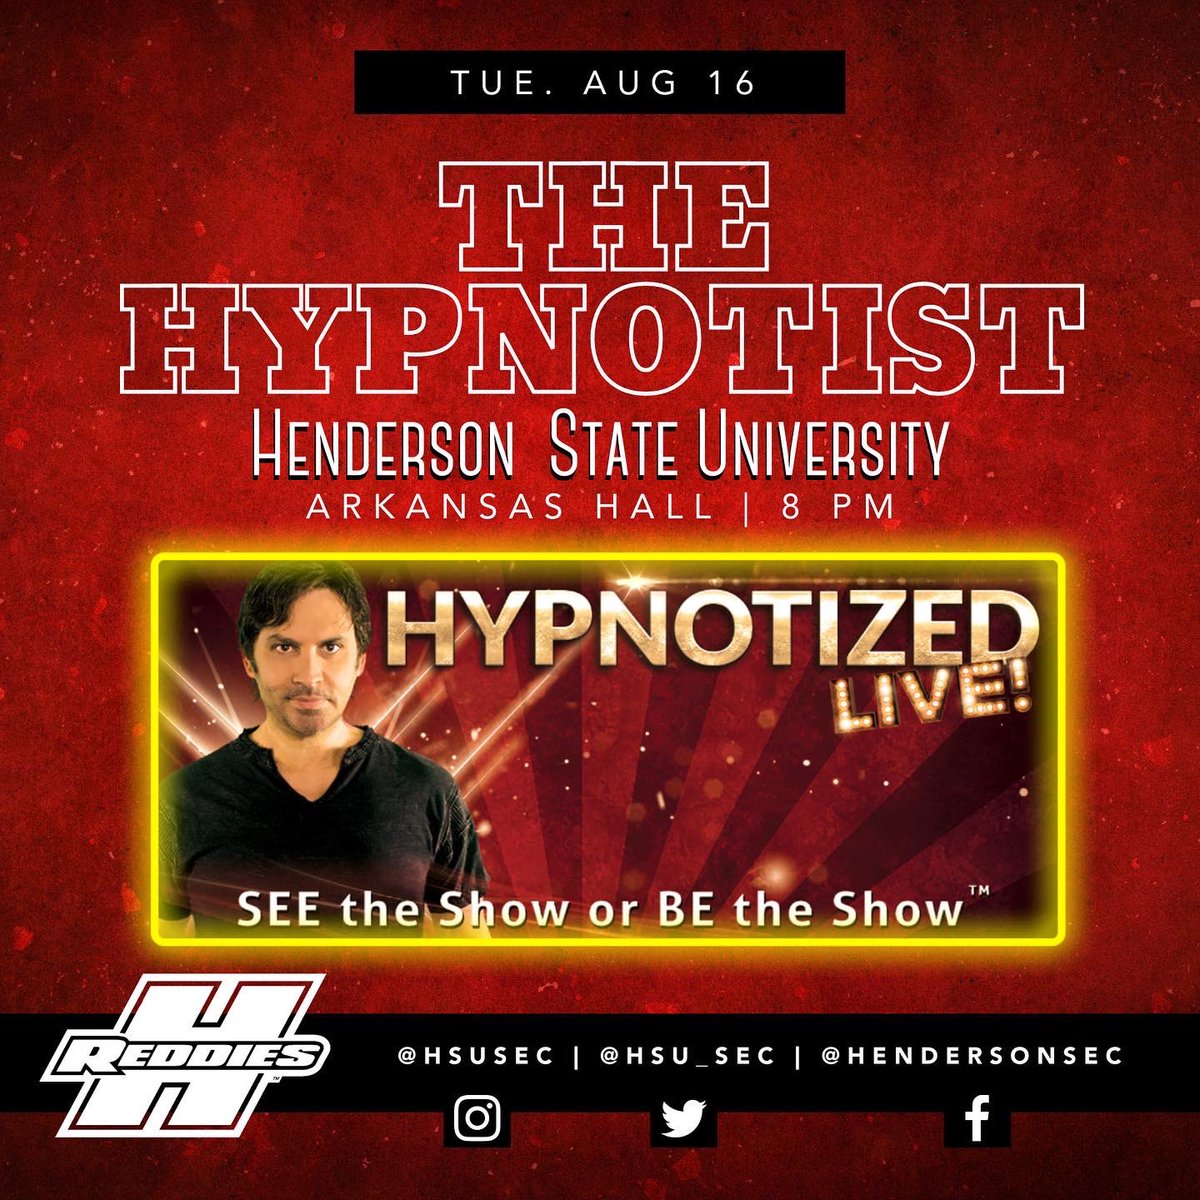 Tonight at Arkansas Hall, come and join the Hypnotized live show. Doors open at 8:00pm!
#WelcomeWeek2022 #ReddieForWhatsNext